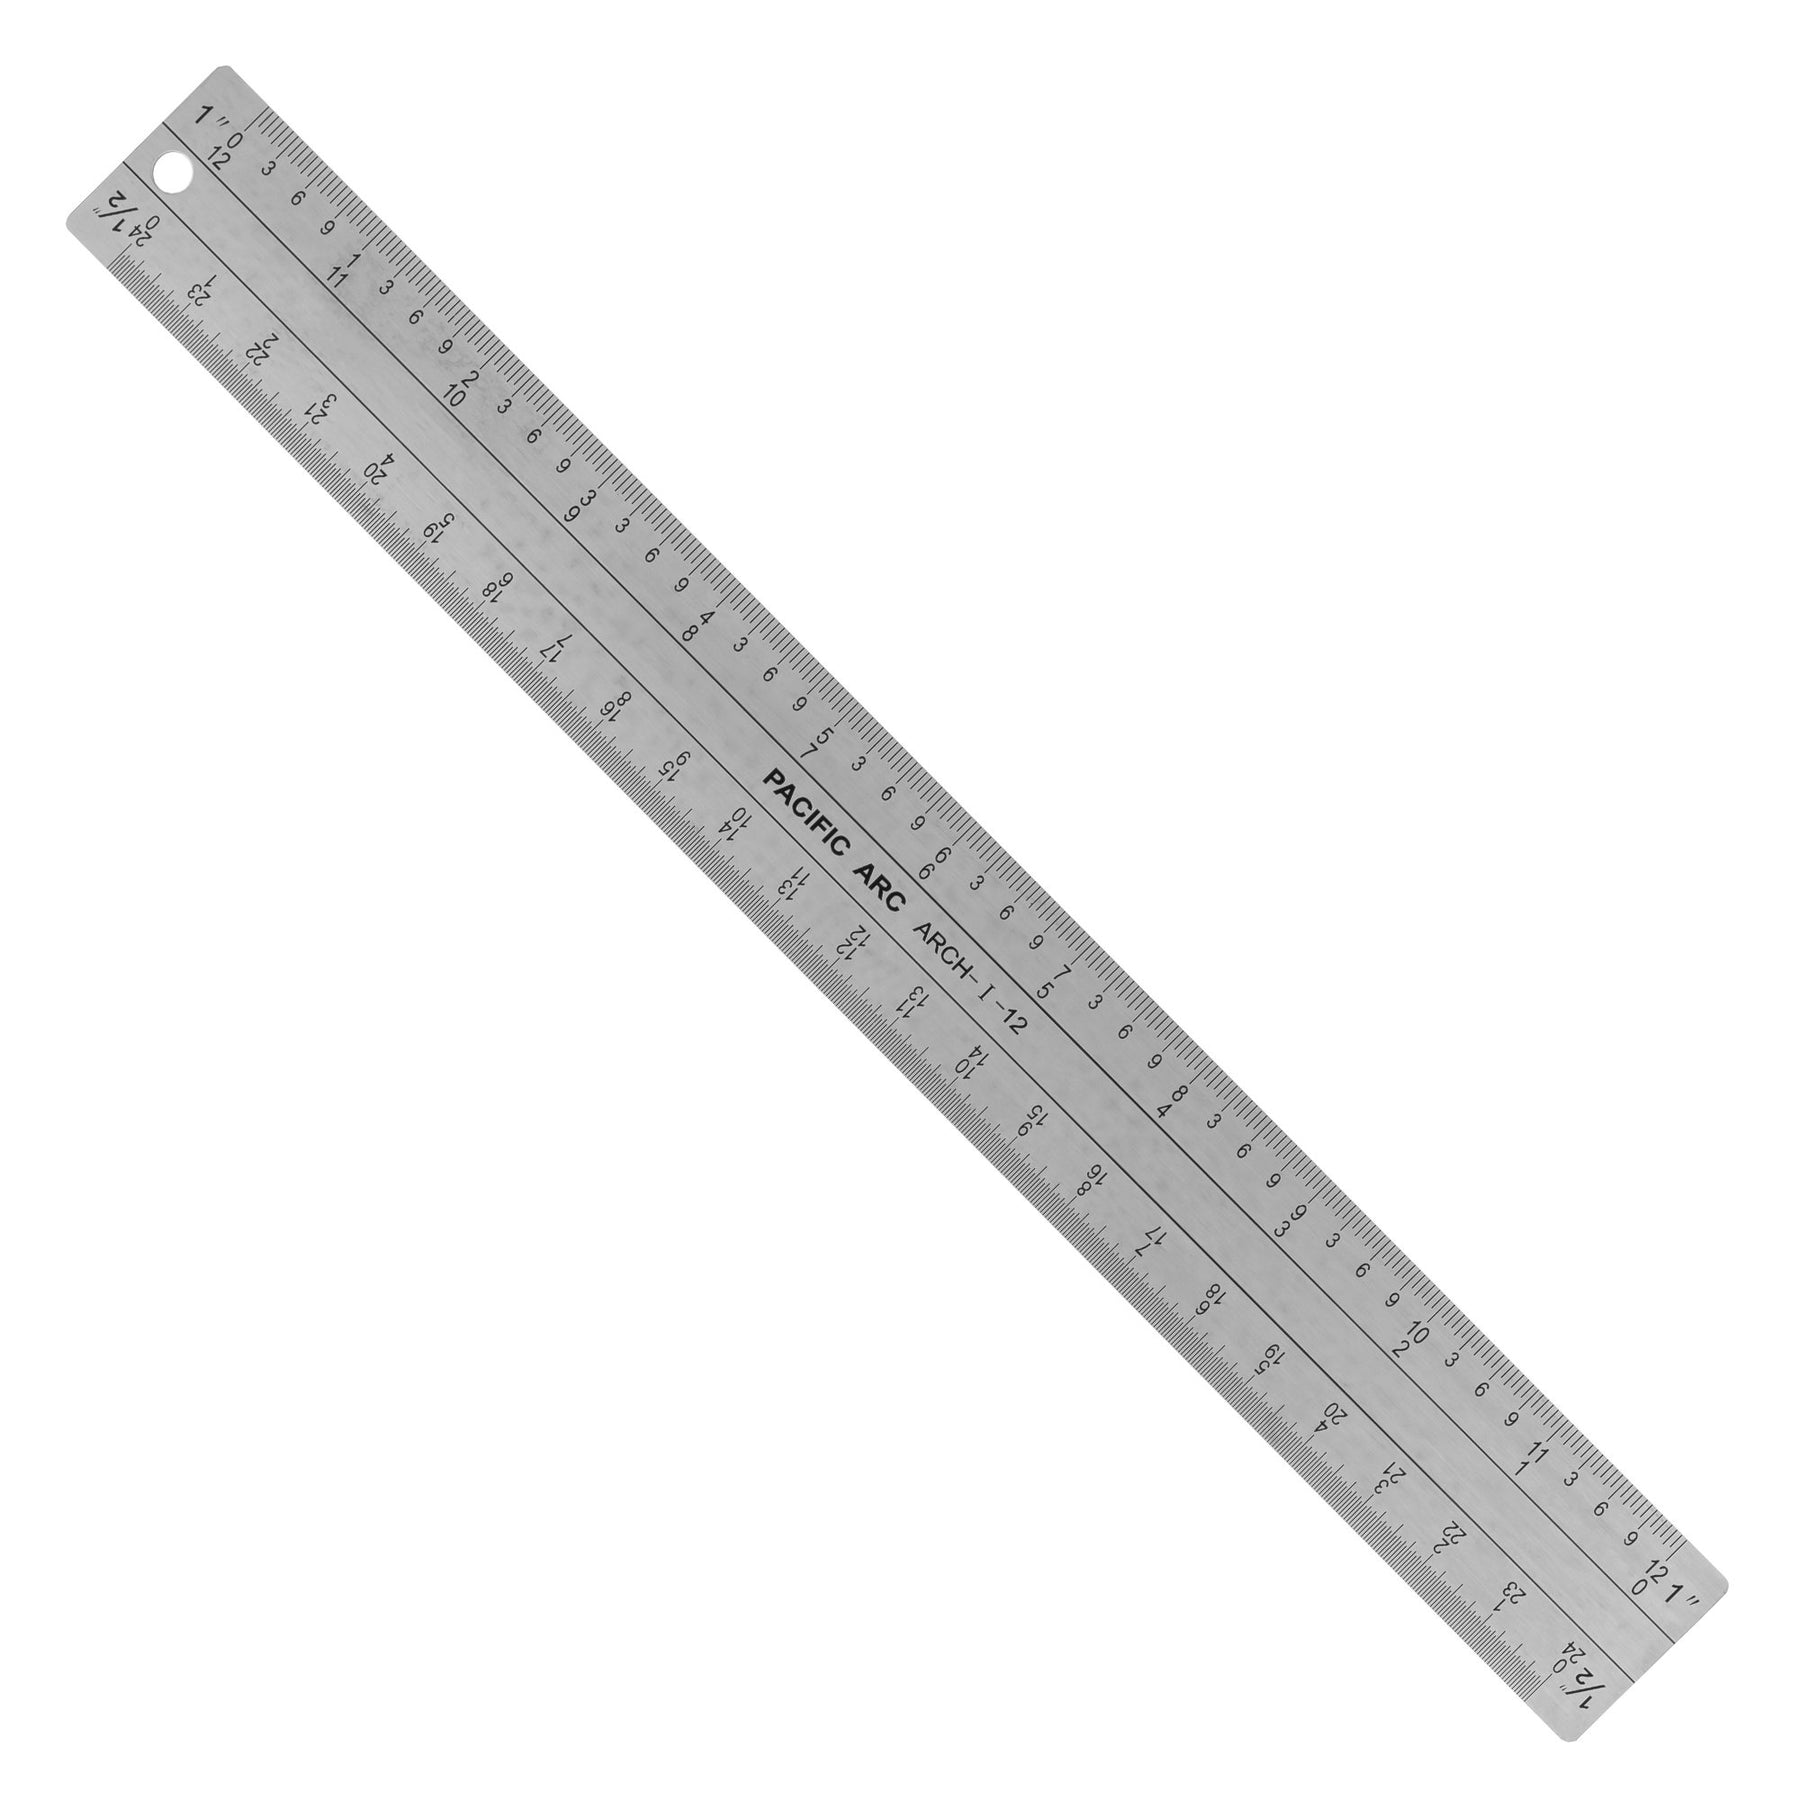 Steel Ruler 12-inch - Luthier - CE-1447.12